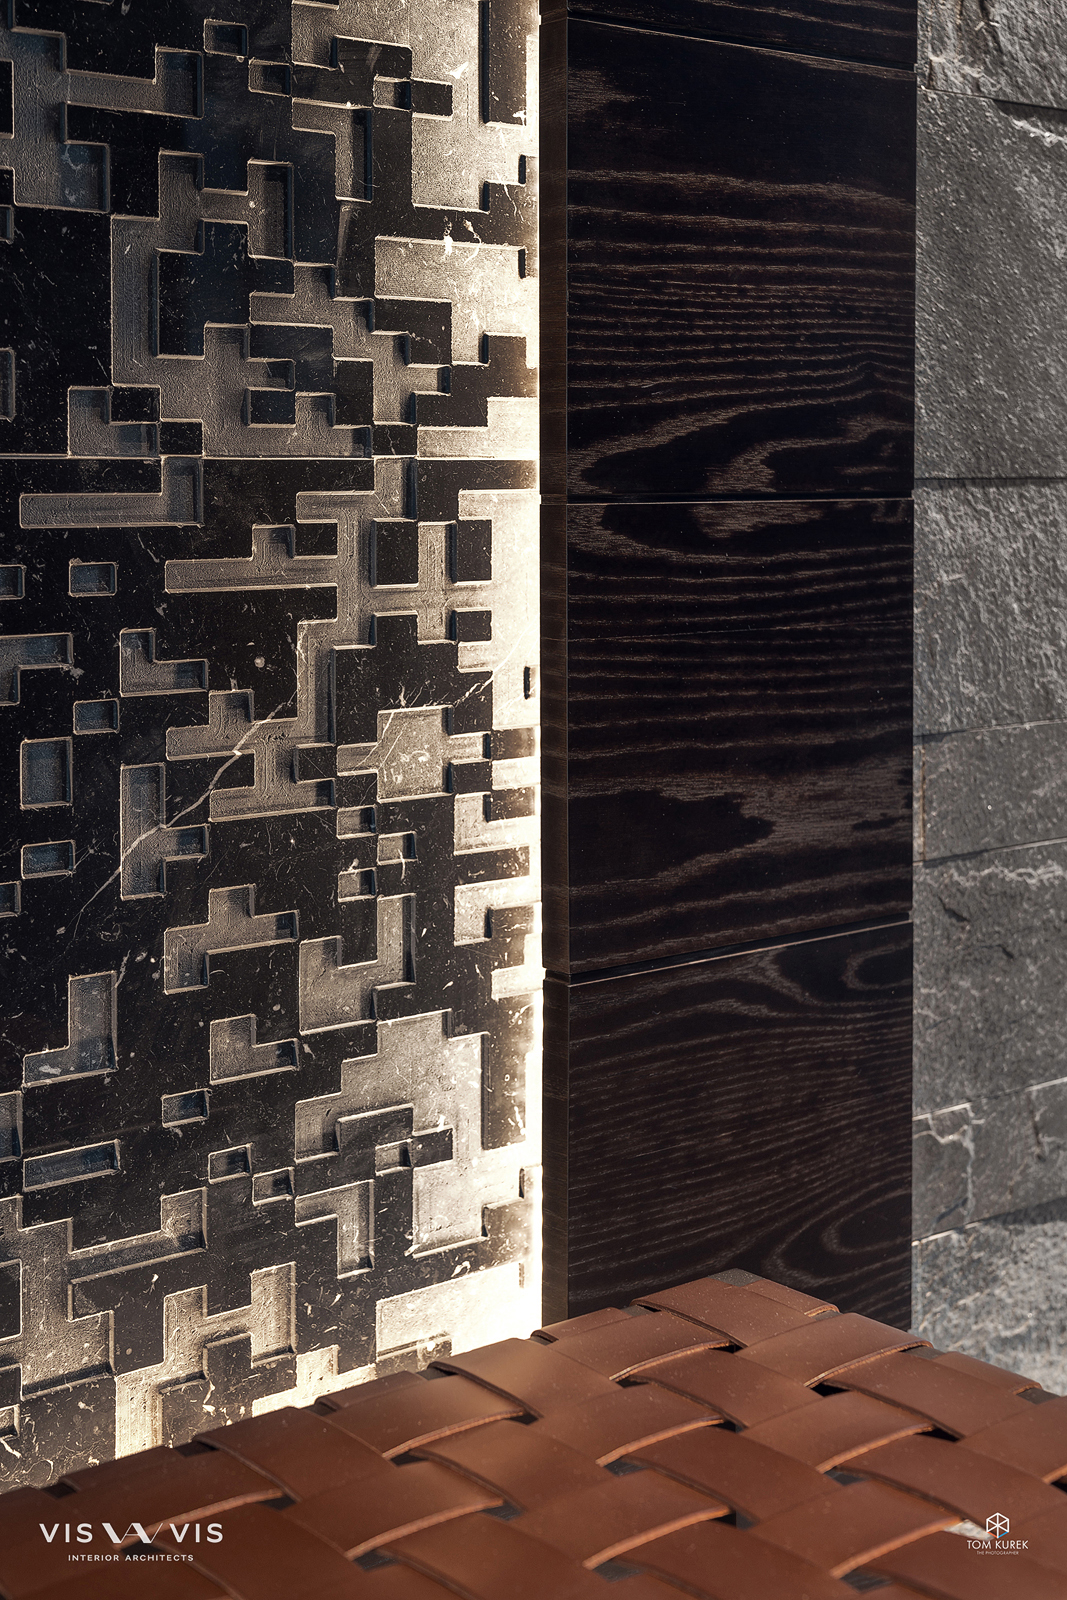 Detail of the custom textures in stone and leather.